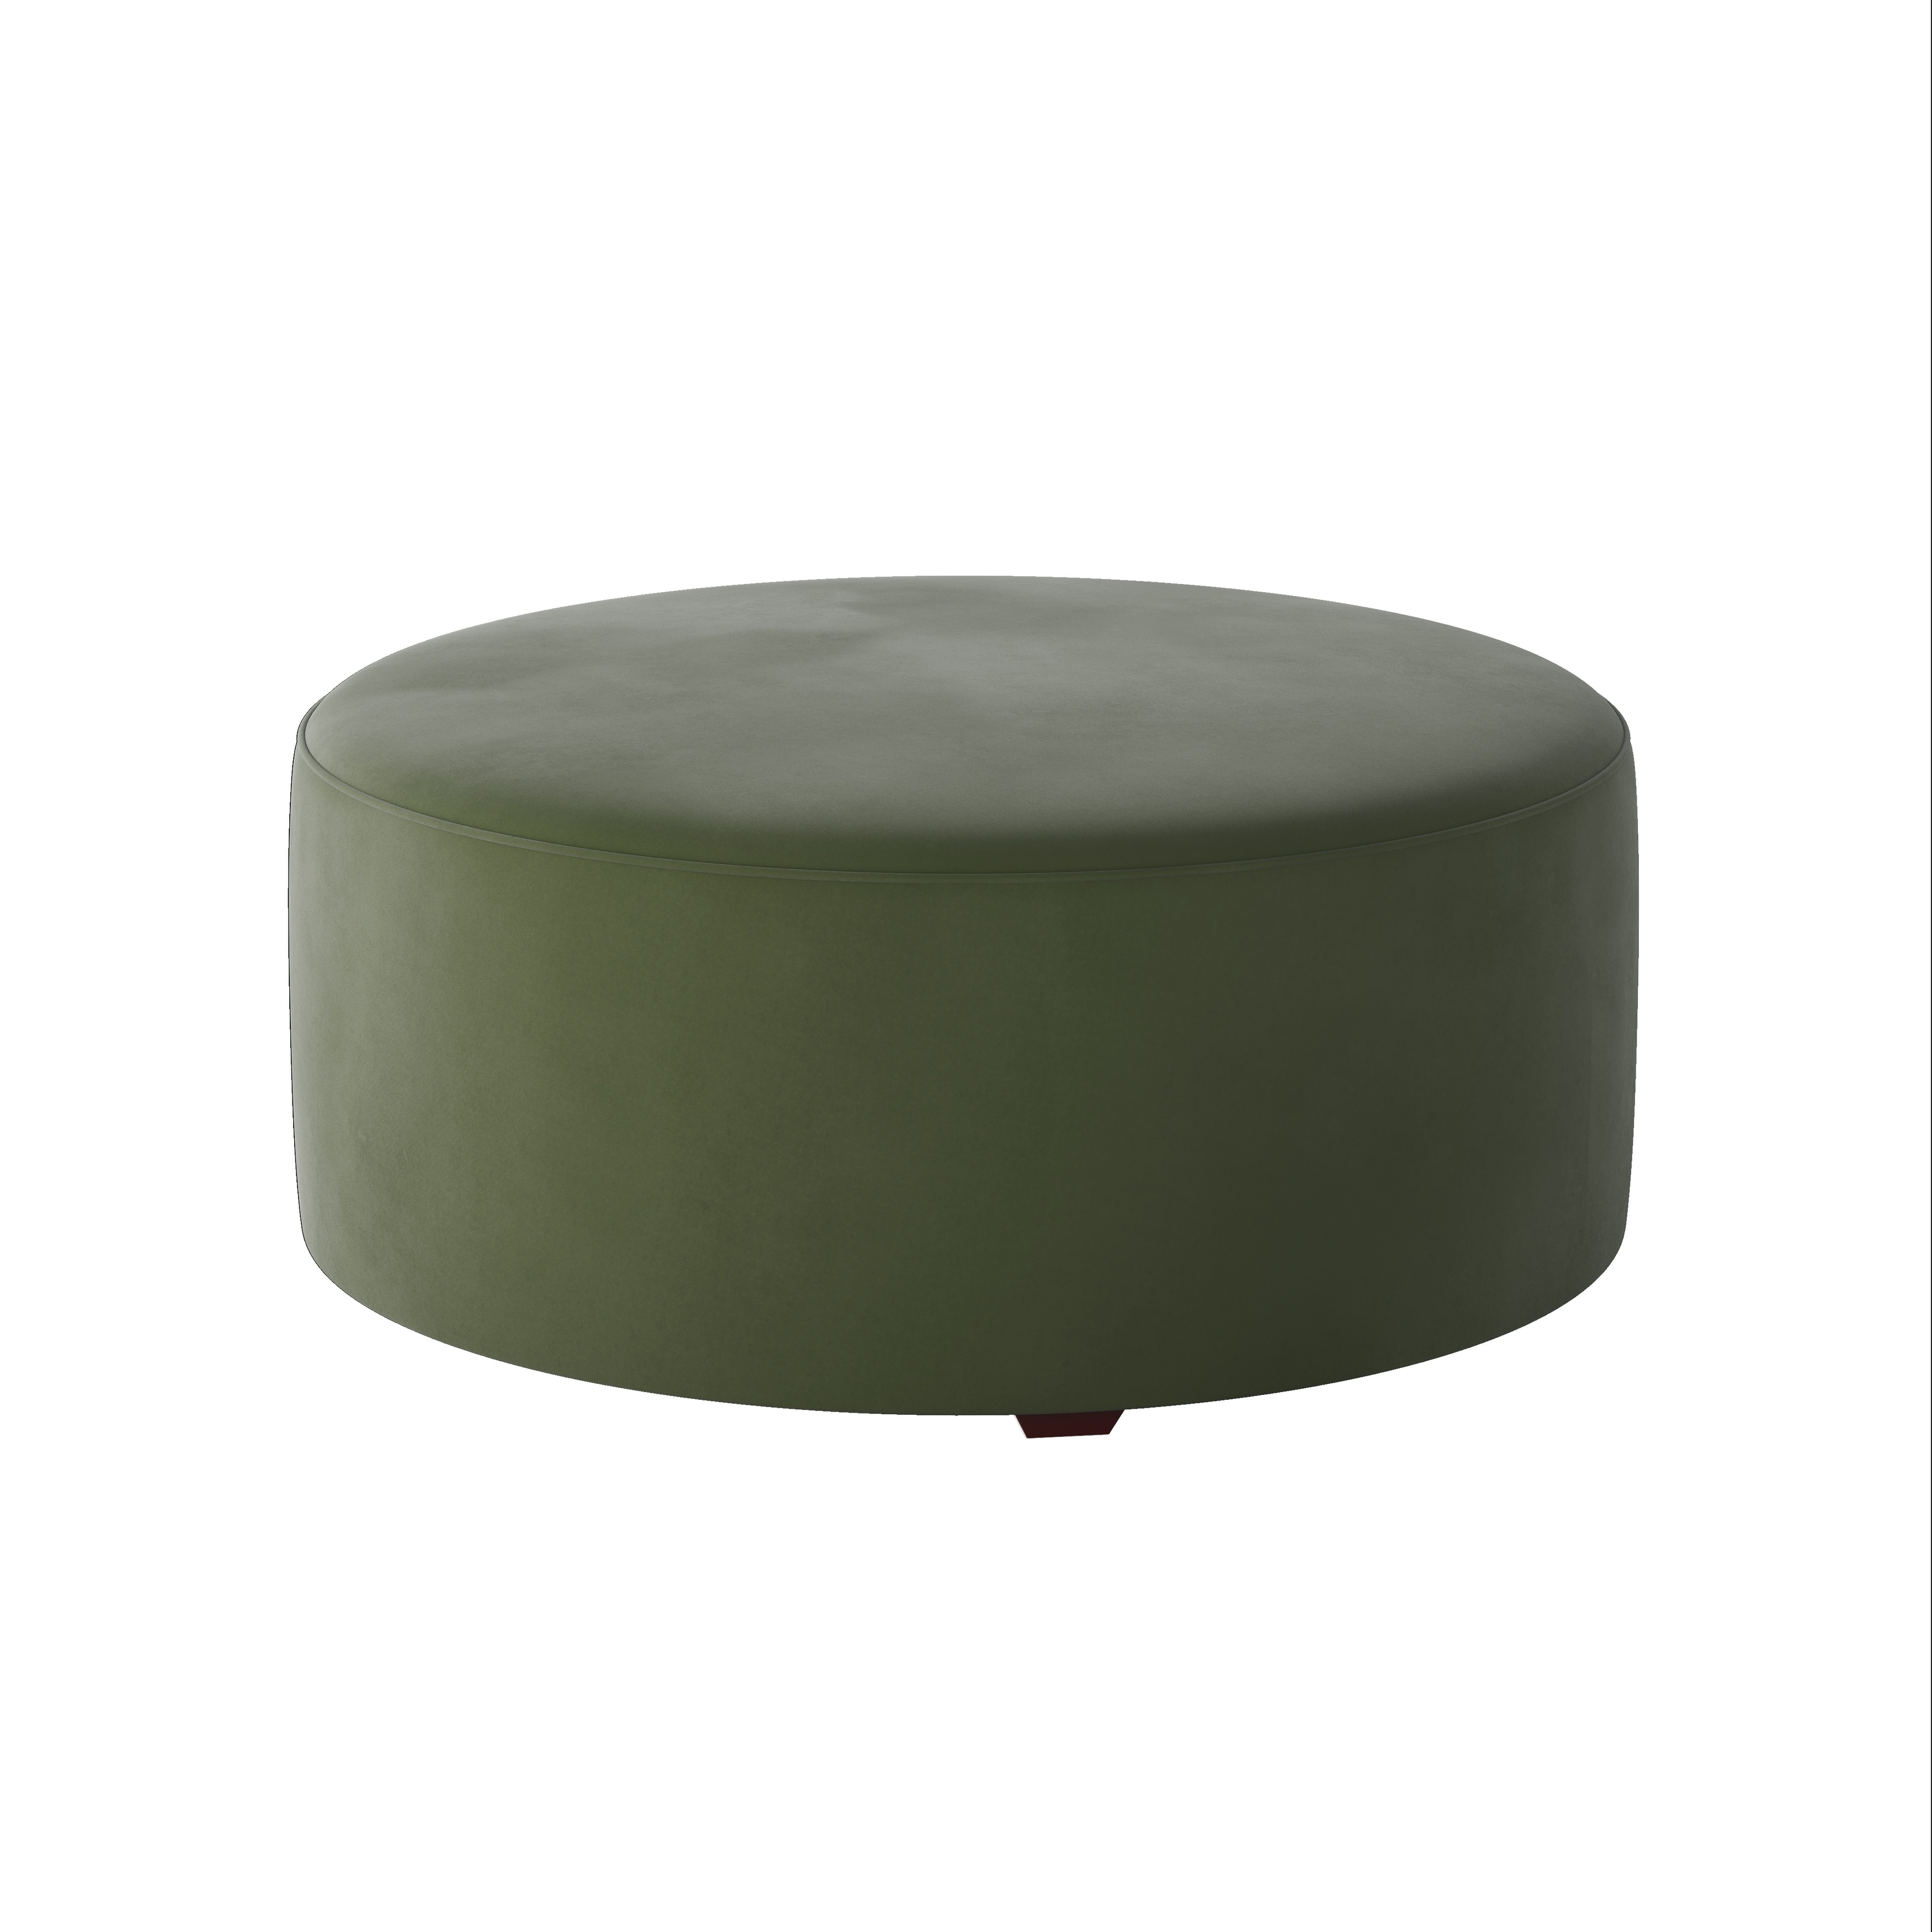 Southern Home Furnishings Bella Forrest Cocktail Ottoman